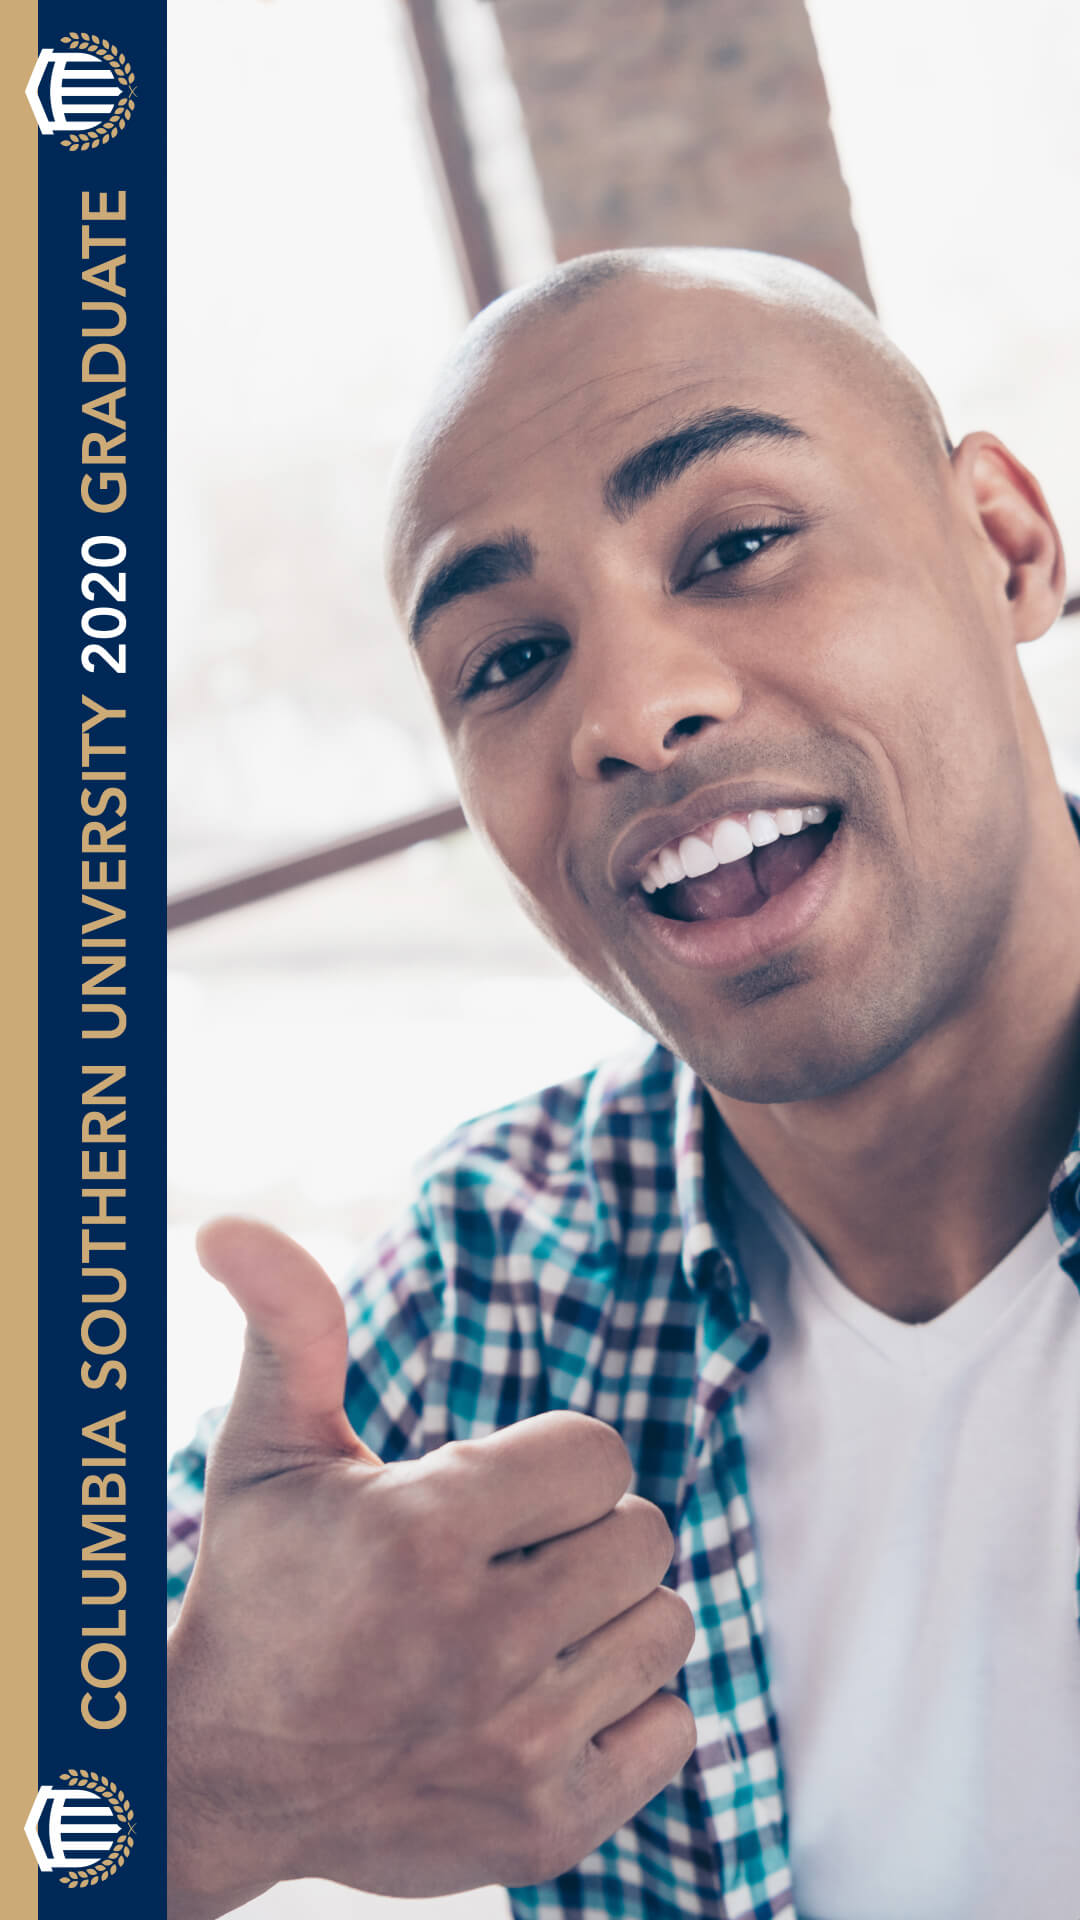 Download Snapchat filter with vertical bar reading "Columbia Southern University 2020 Graduate" with CSU shield logos